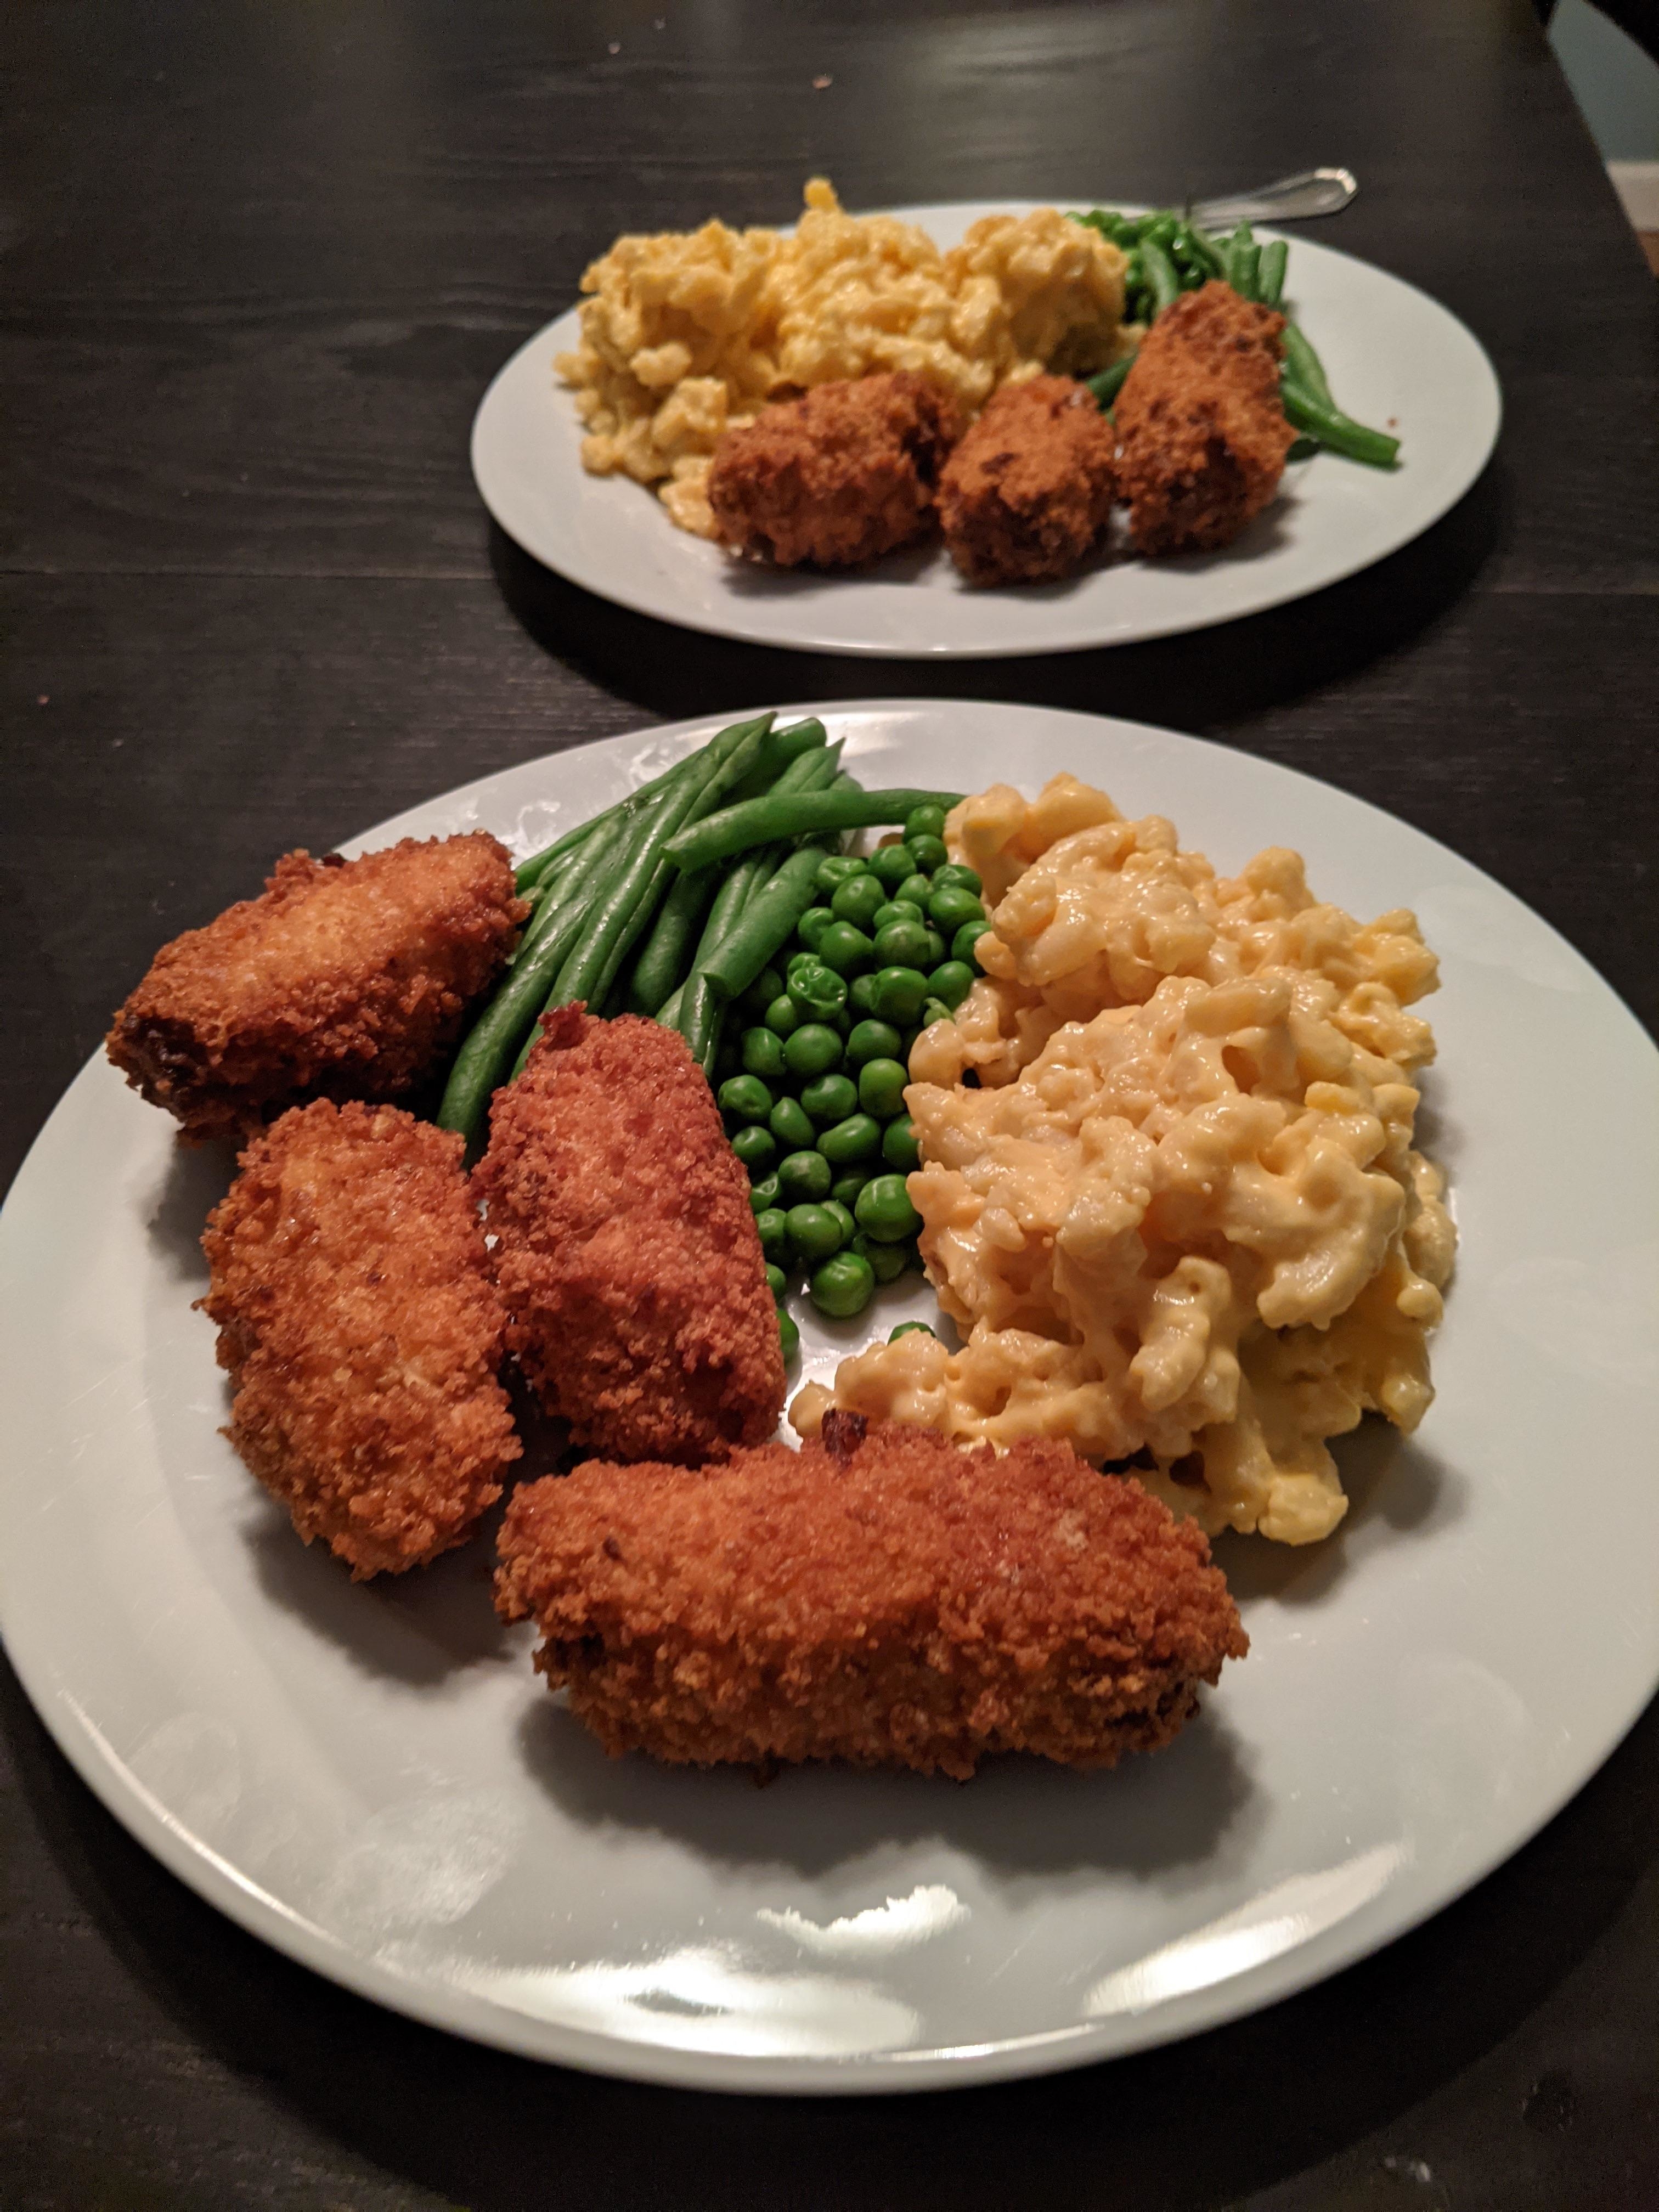 Two plates of food with breaded chicken, green beans, peas, and macaroni and cheese